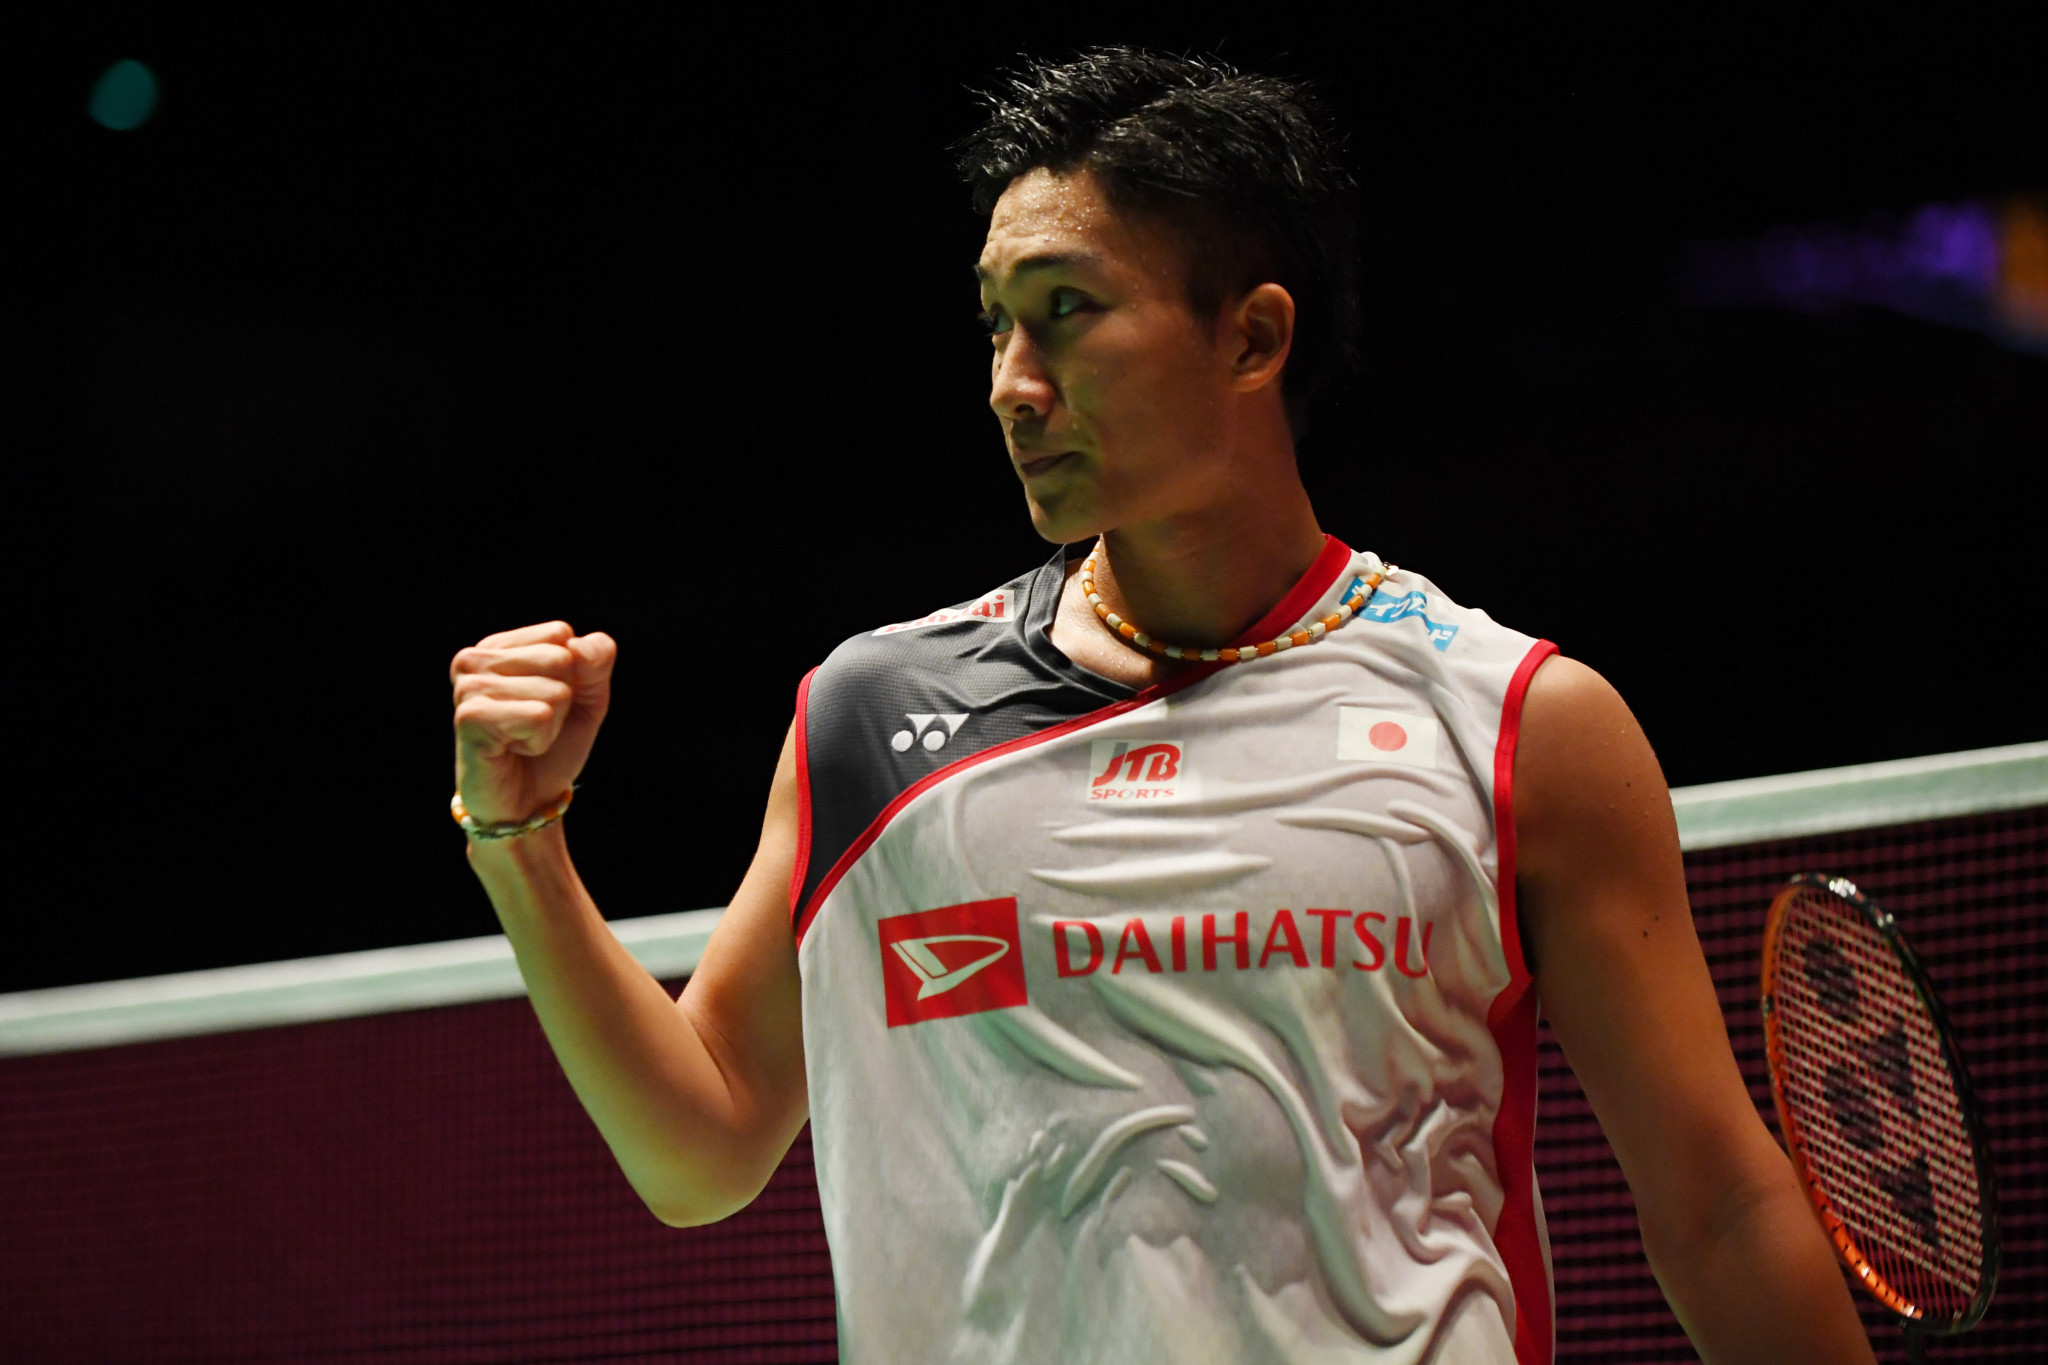 Badminton's best prepare to collide again at BWF China Open